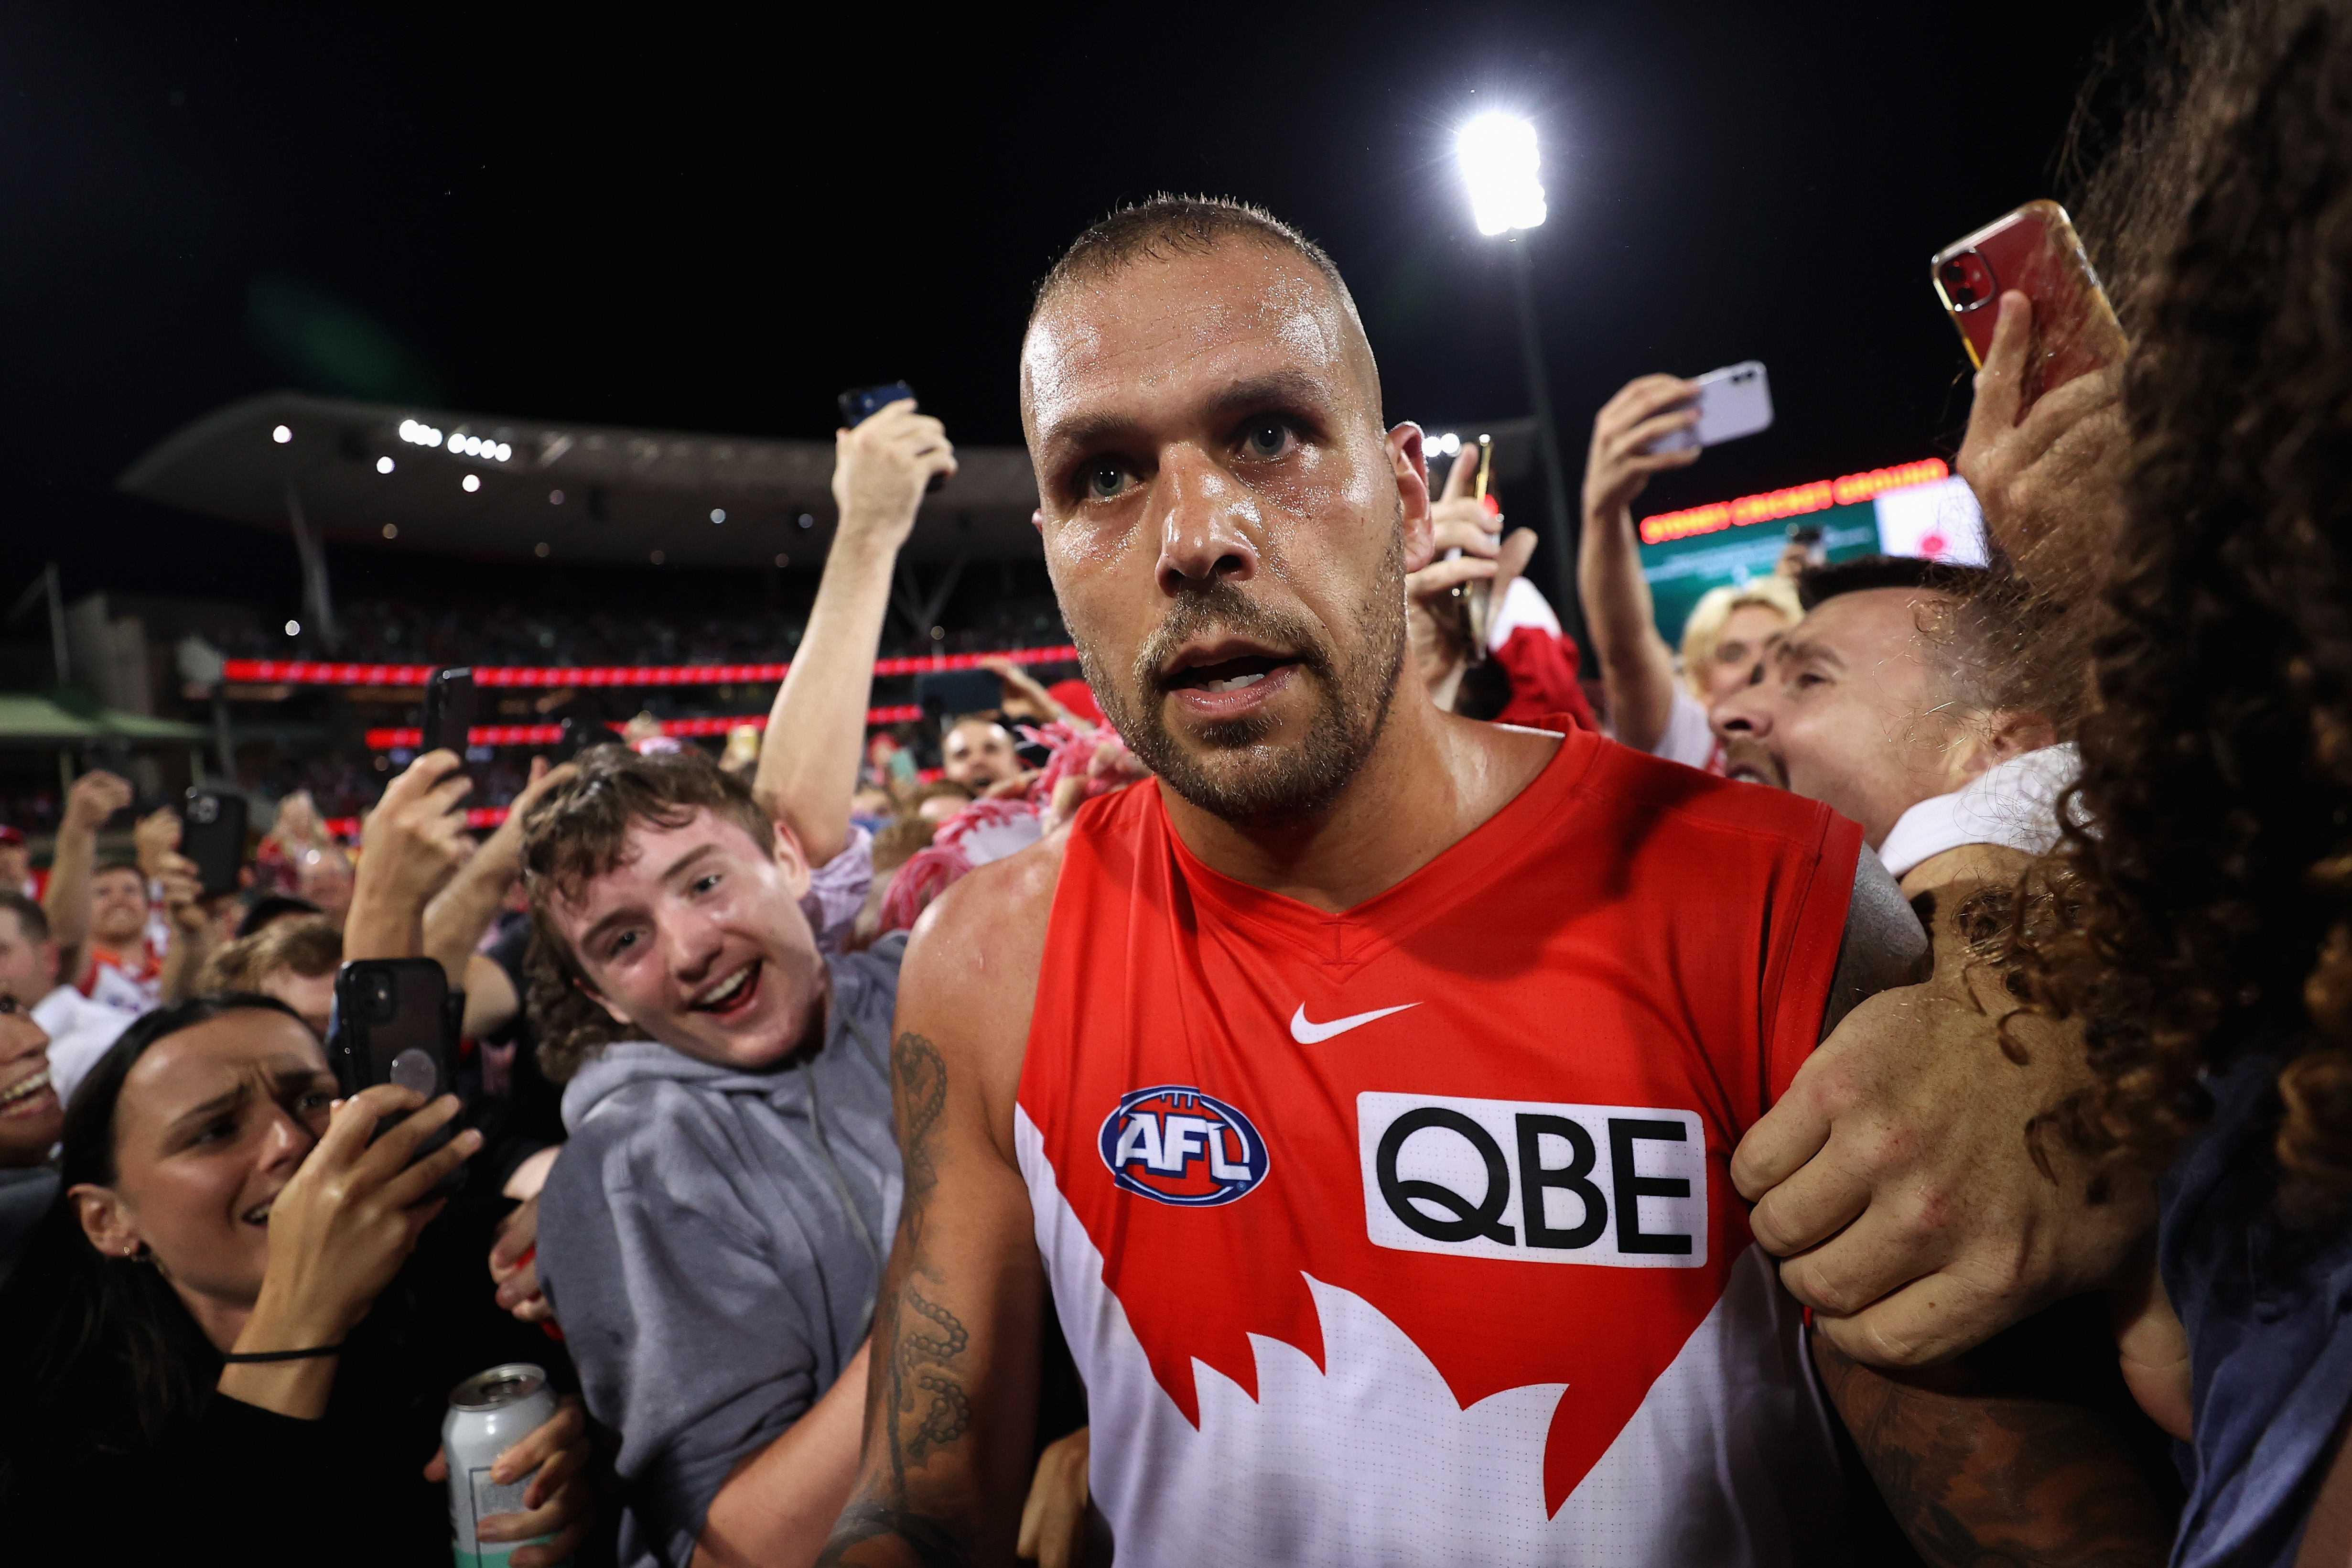 Lance Franklin looks serious as he moves while a massive crowd of fans get up close and personal